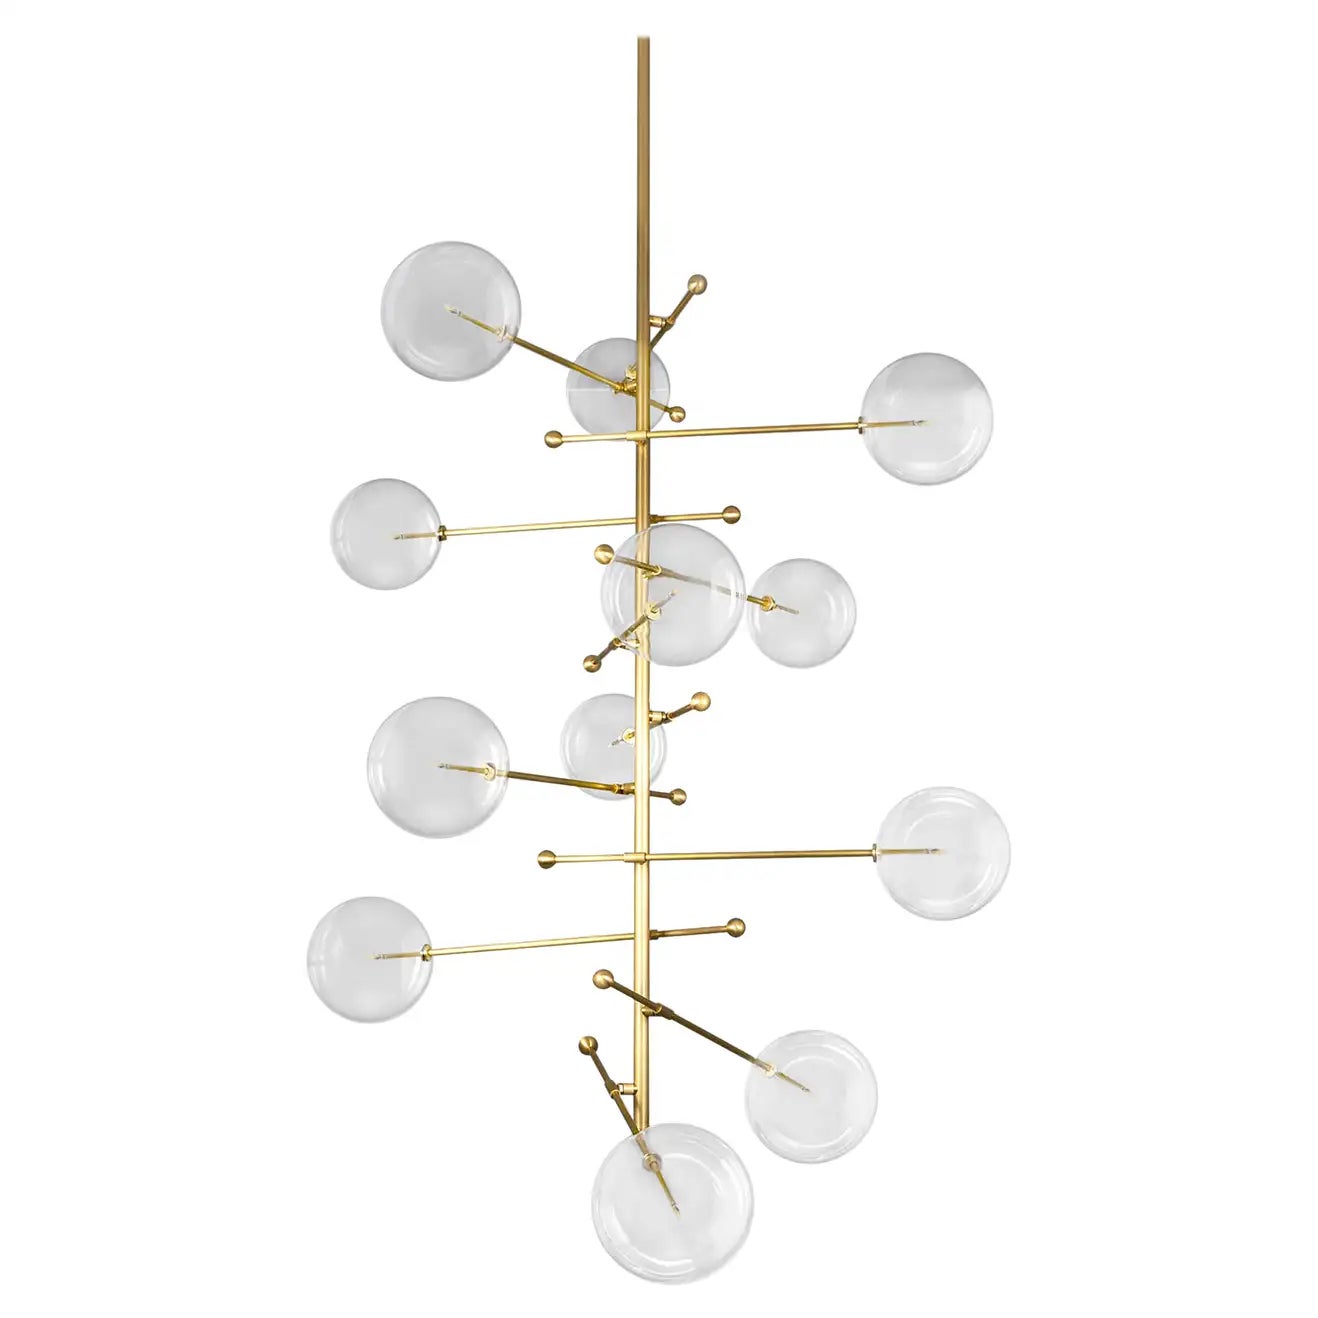 RD15 12 Arms Black Gunmetal Chandelier by Schwung
Dimensions: W 140 x D 140 x H 289 cm
Materials: Solid brass. Hand blown glass globes
Finishes: Black gunmetal. Available also in polished nickel, and lacquered burnished brass. 
All our lamps can